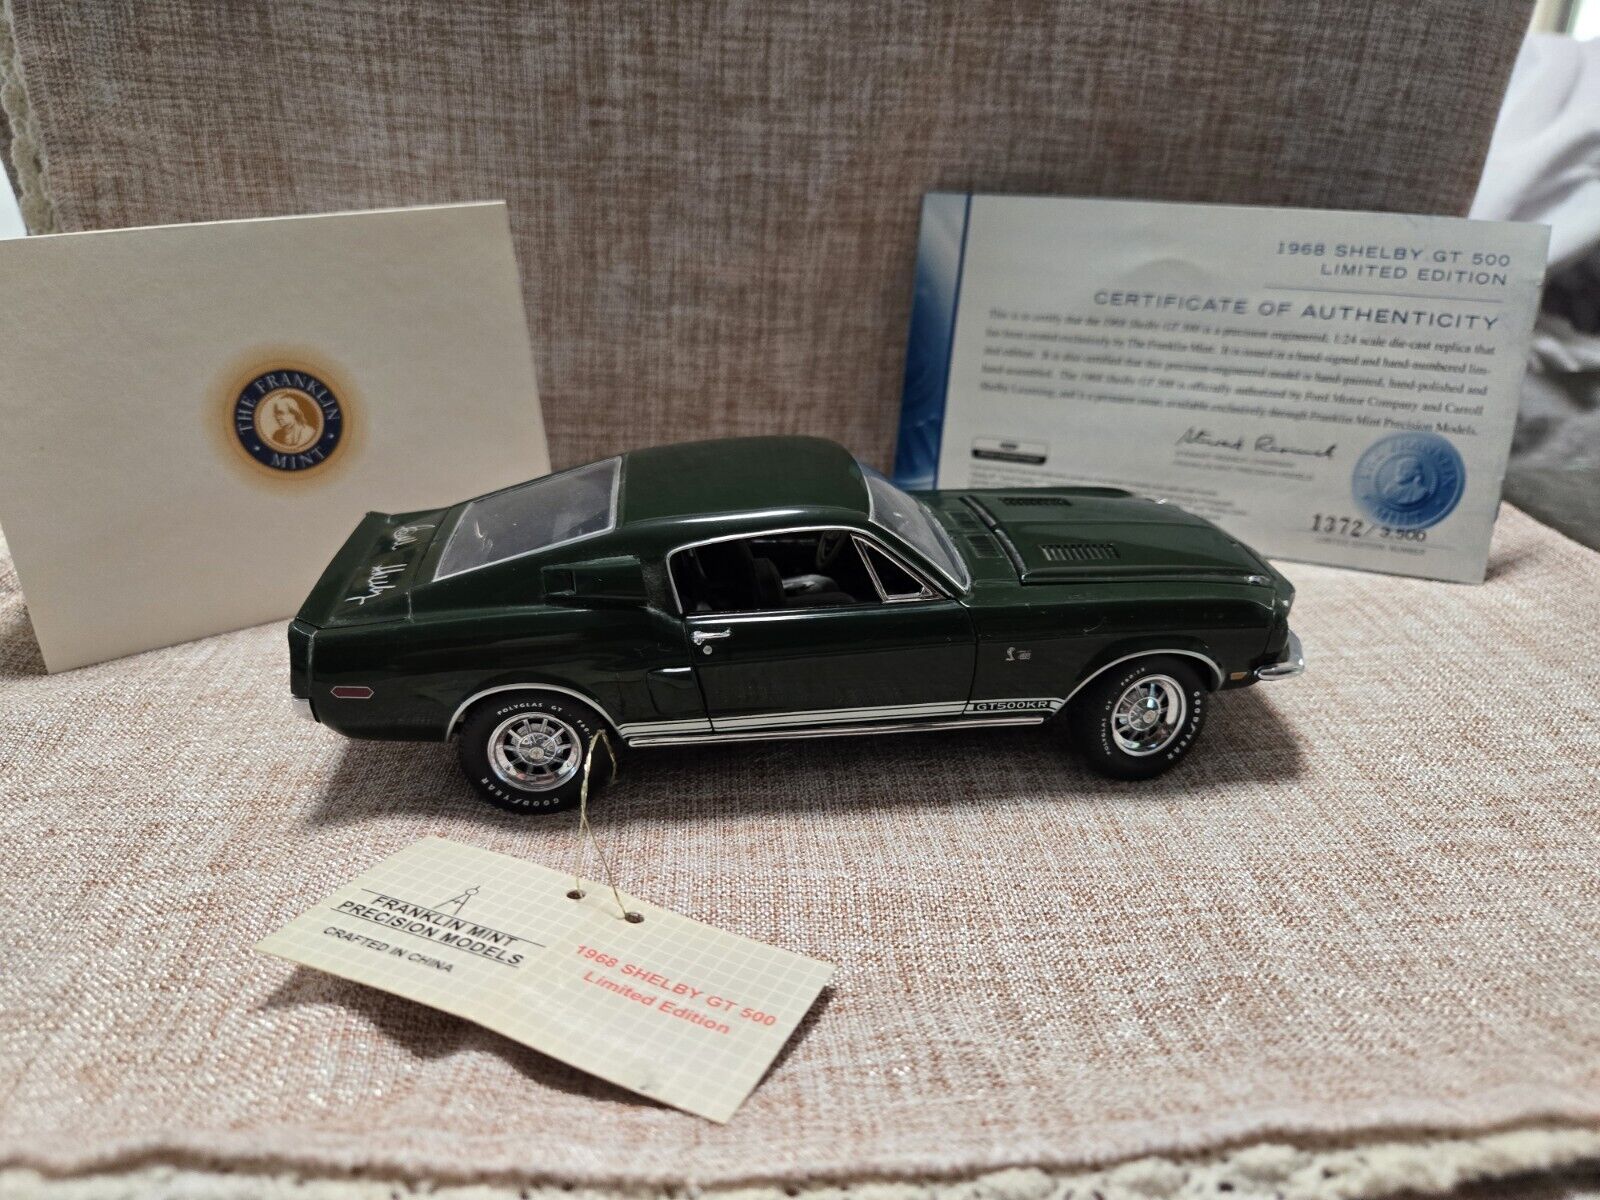 FRANKLIN MINT 1968 SHELBY GT 500 SIGNATURE EDITION LIMITED SCALE 1:24 WITH COA B